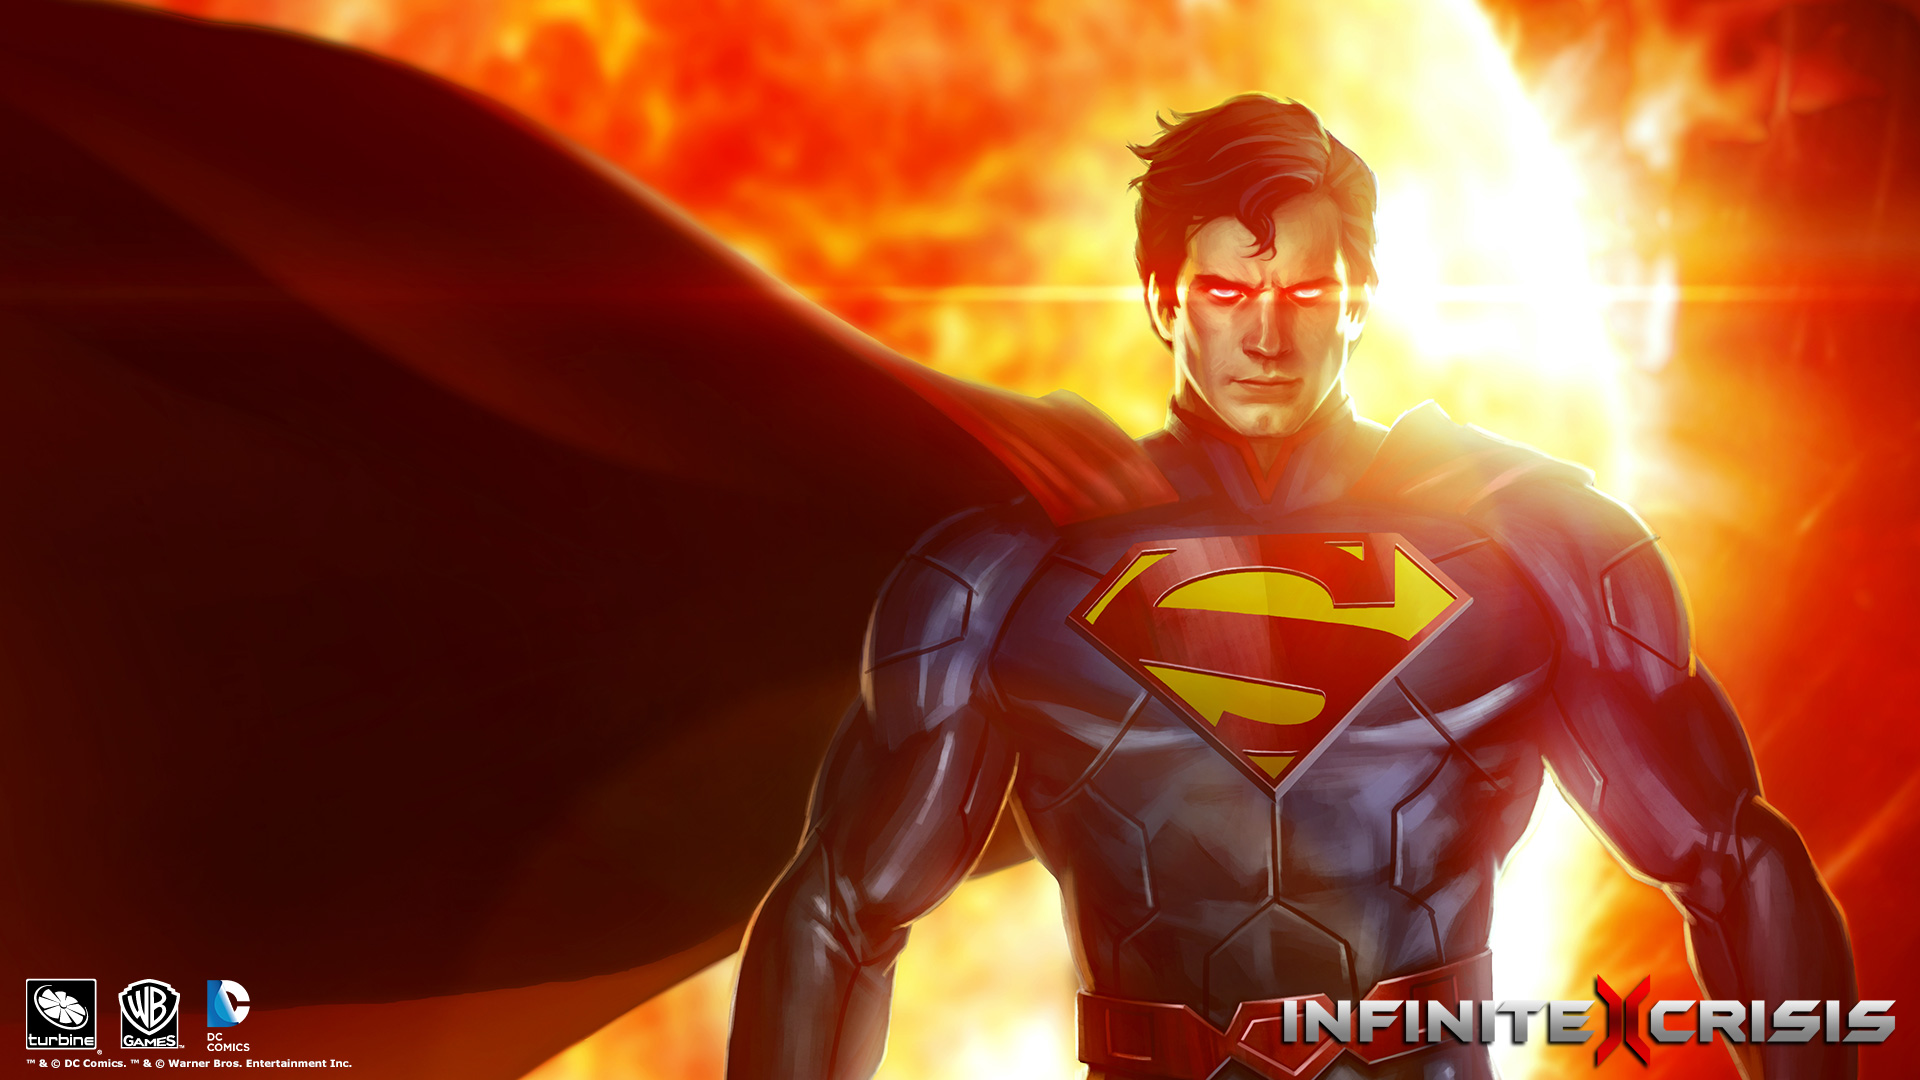 Superman-Wallpaper-Backgrounds-HD-Free-Download-08